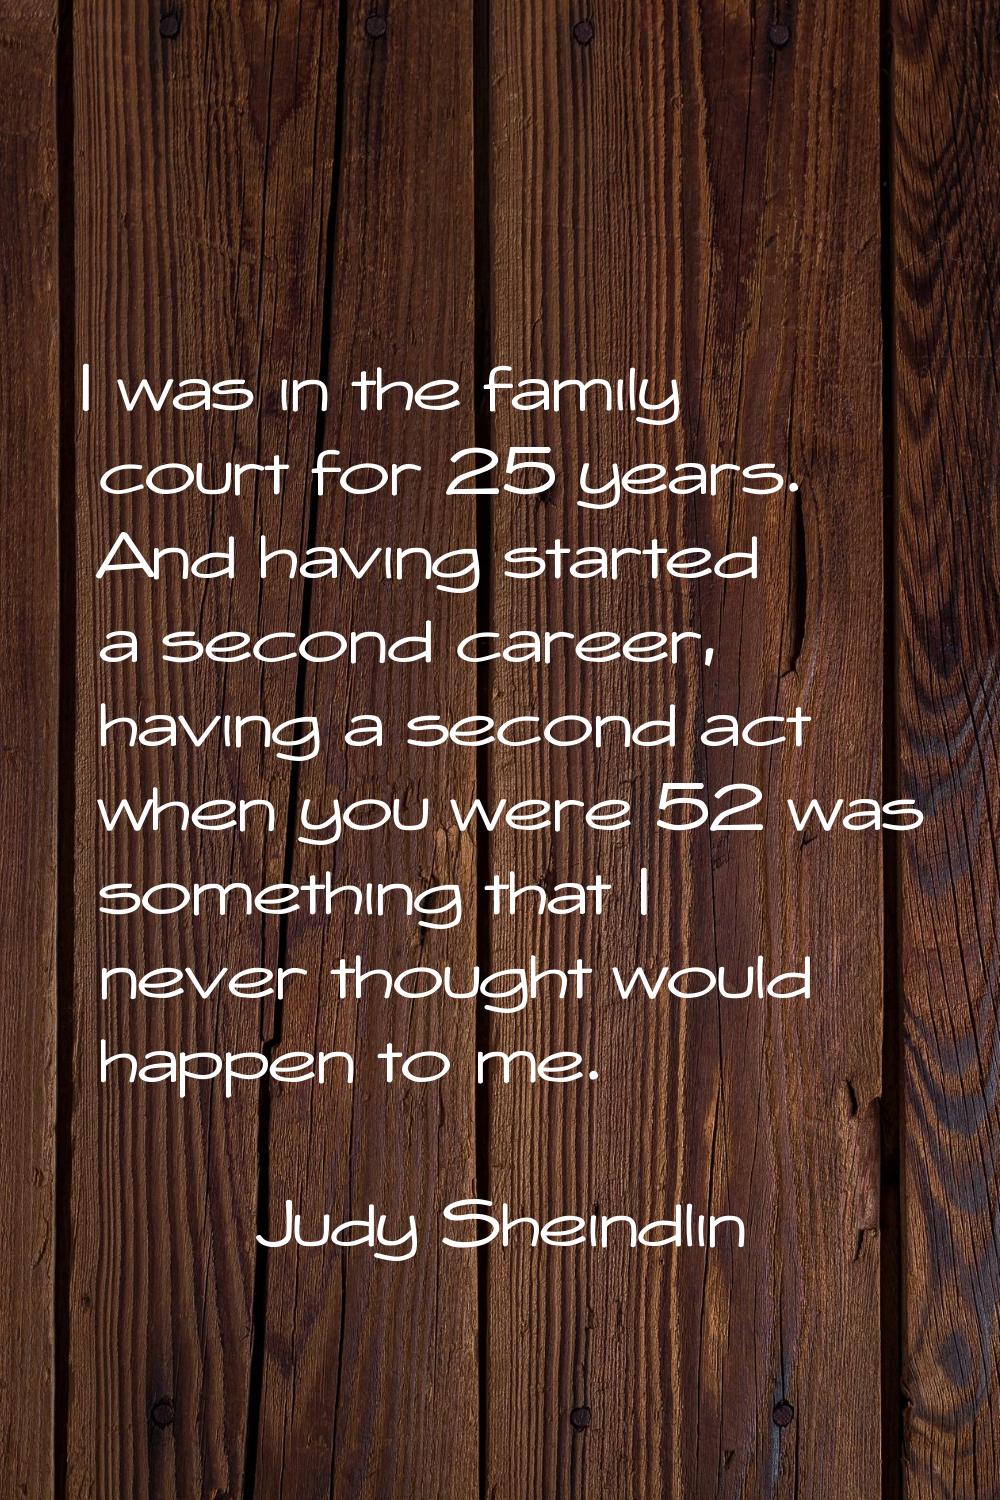 I was in the family court for 25 years. And having started a second career, having a second act whe